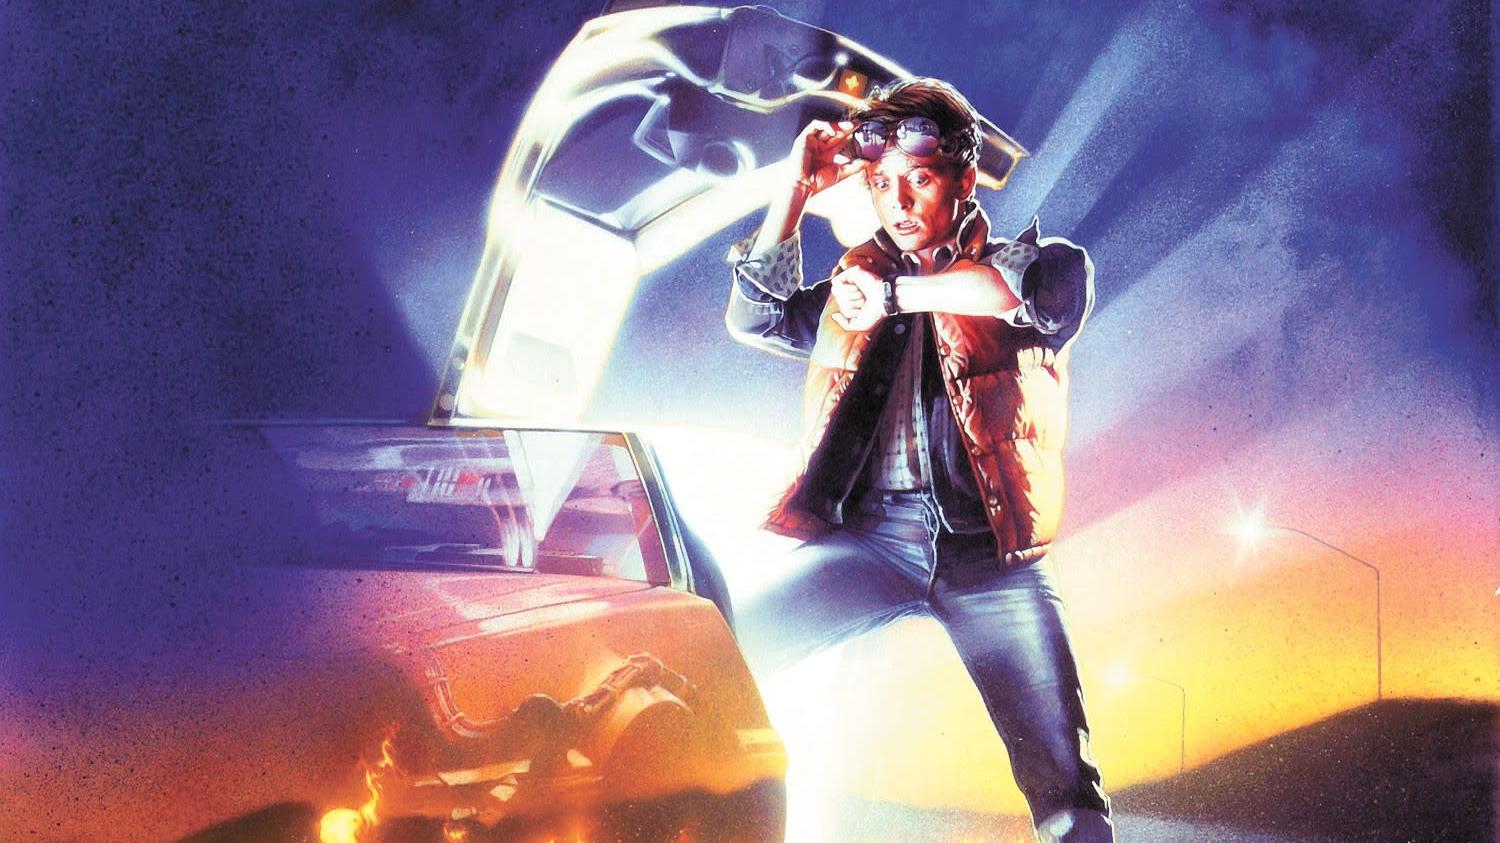 We love Back to the Future, but it's not coming back. (Image: Universal Pictures)